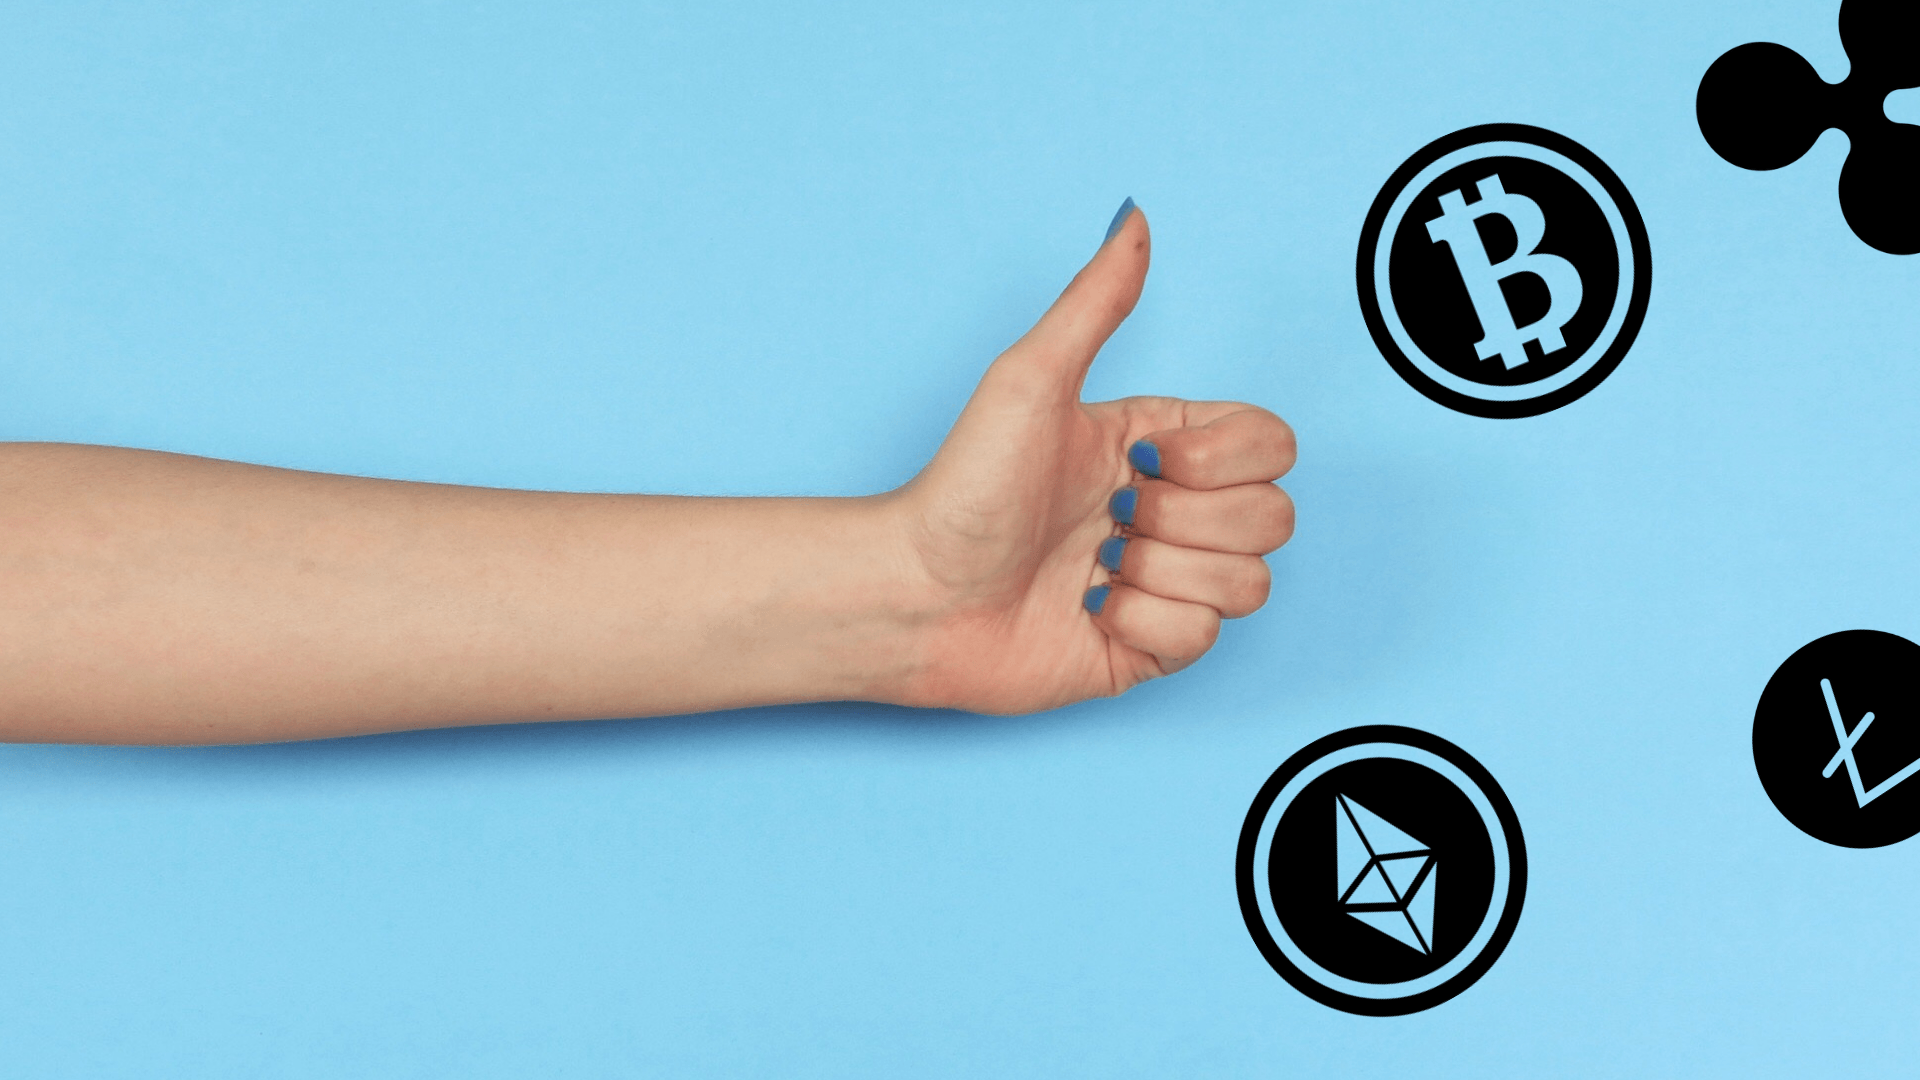 hand showing thumbs up, symbolising Facebook, with cryptocurrency symbols around it